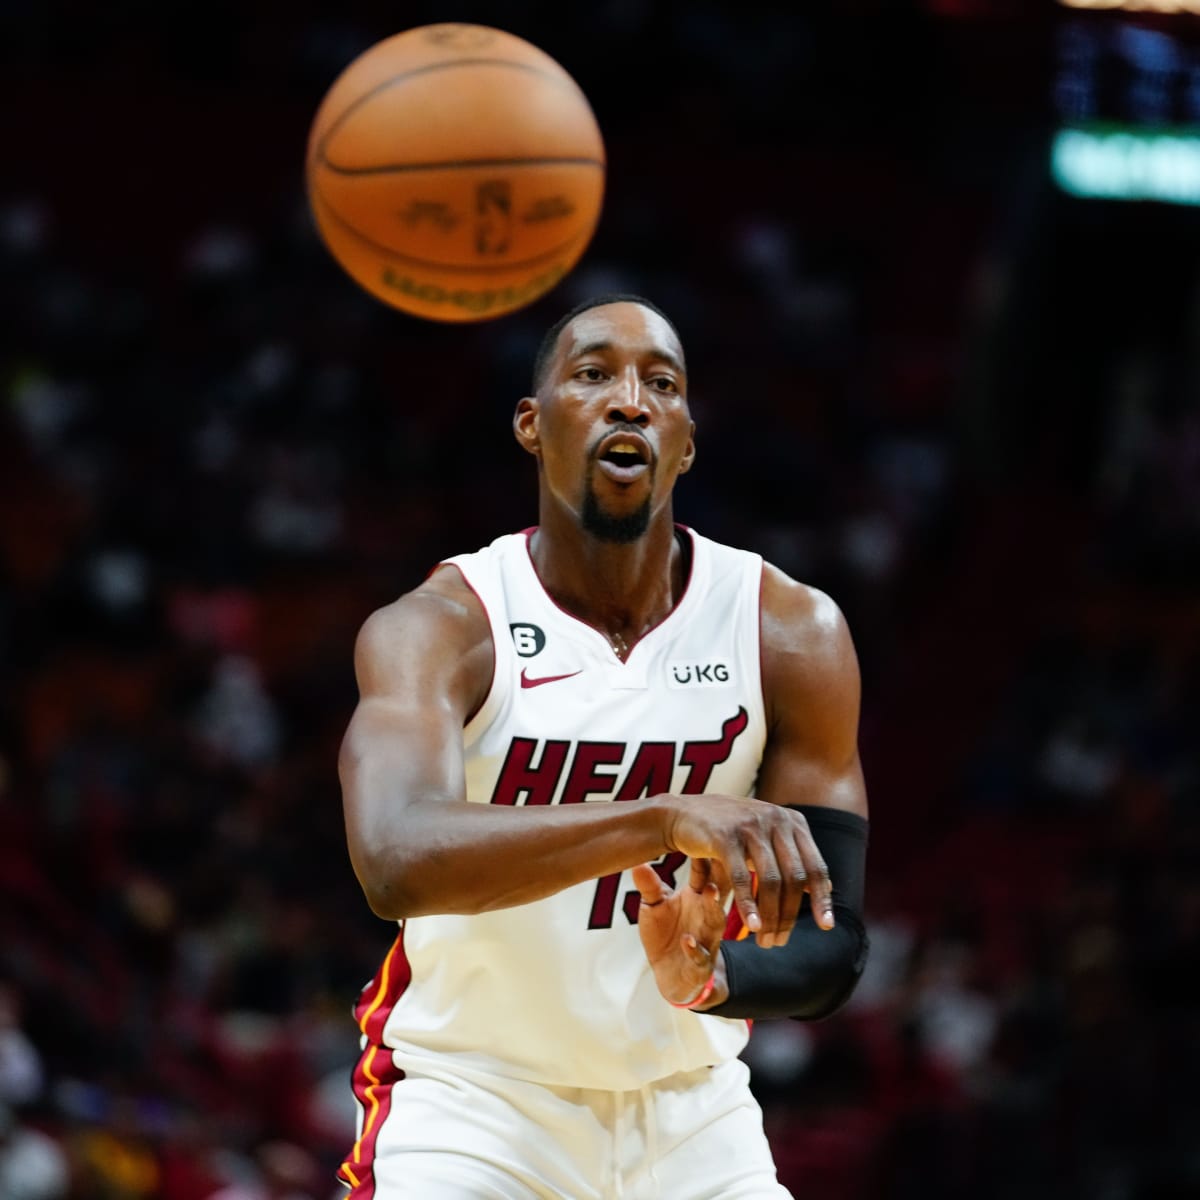 Why he don't get fined?': Heat's Bam Ado reacts to reporter